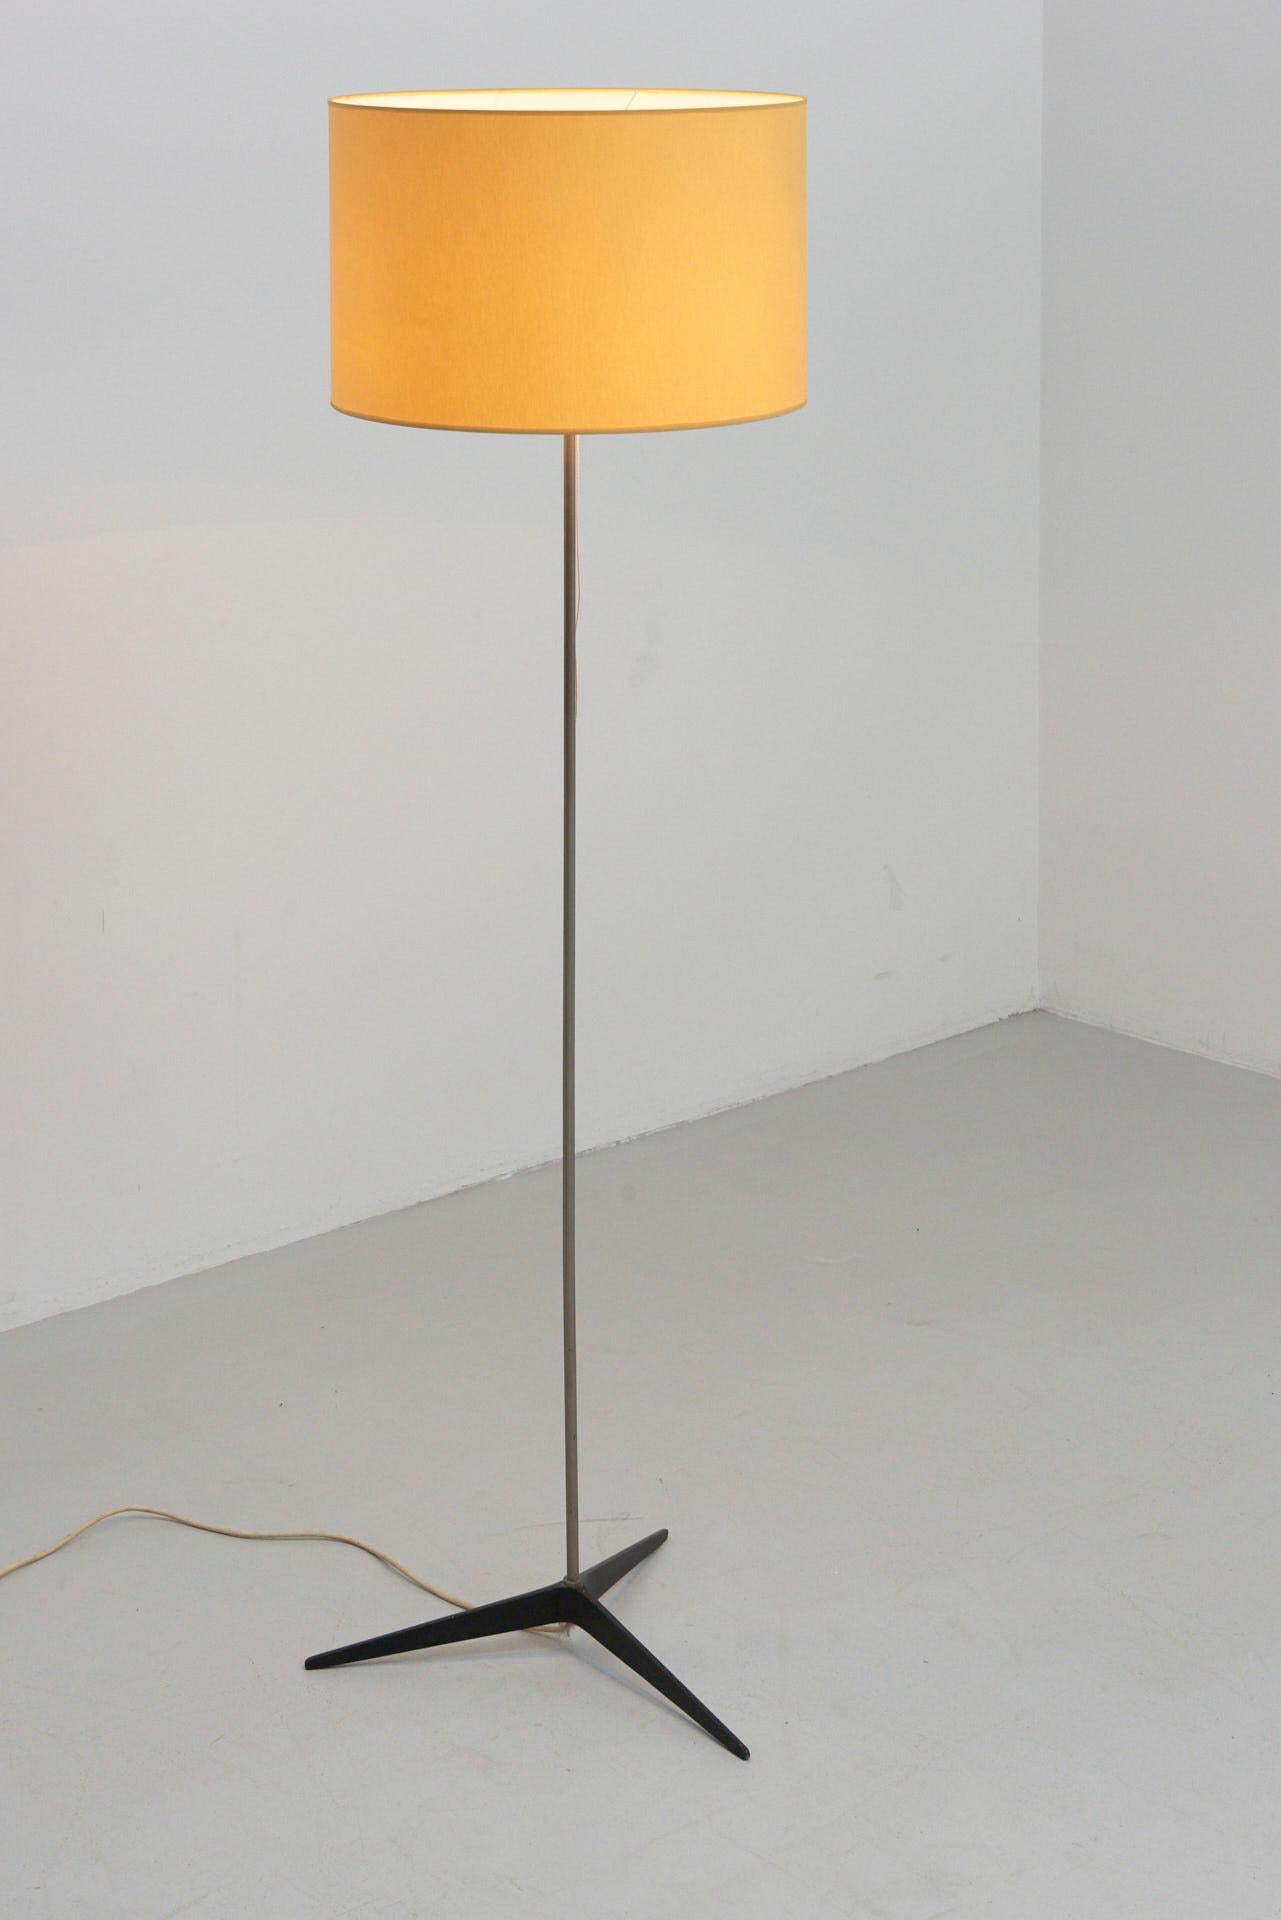 A floor lamp with 3-star foot in black steel and original yellow lampshade. Holds 2 bulbs (E27).